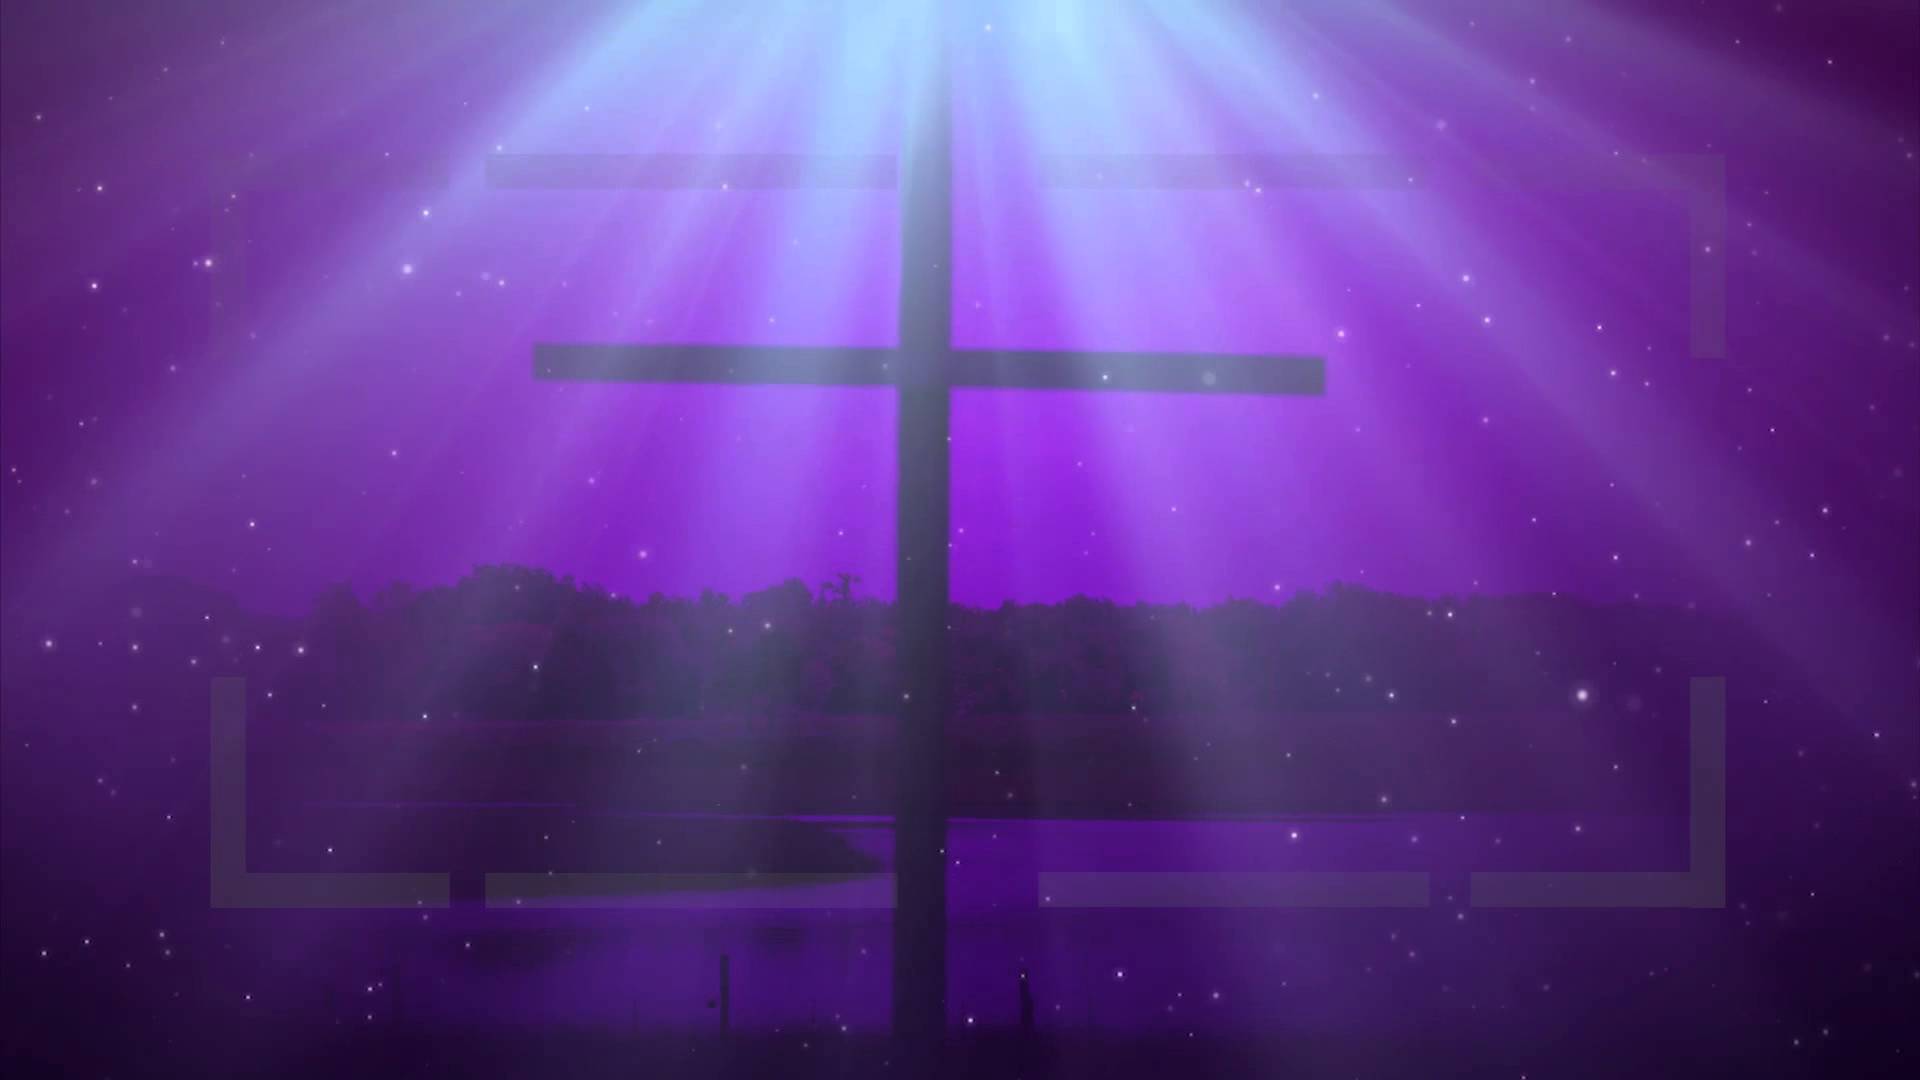 welcome to church motion background